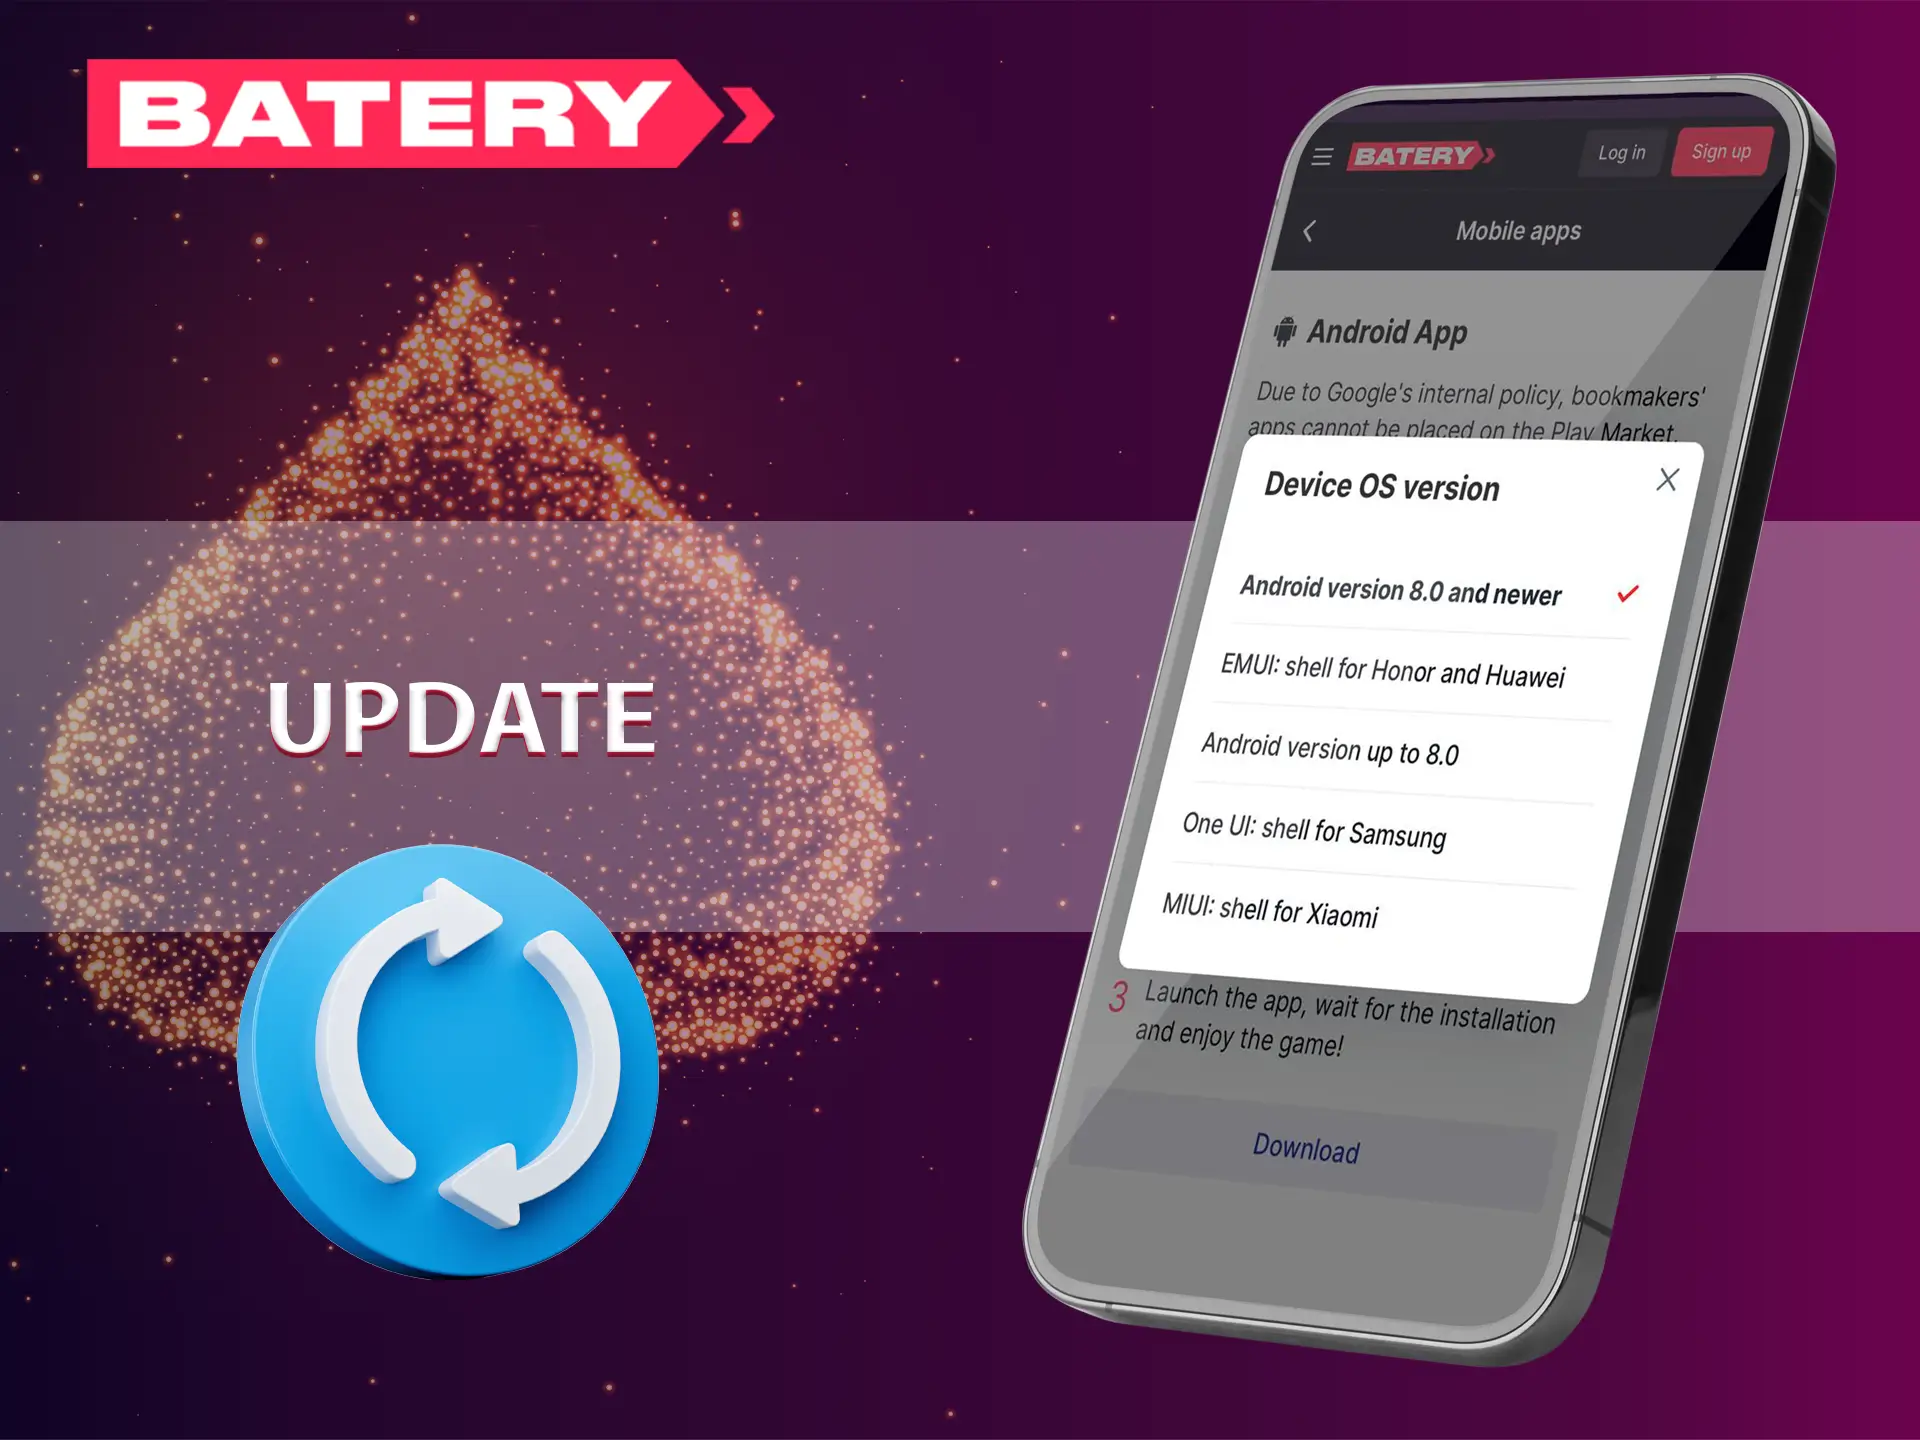 Update the app to access new Batery casino features.